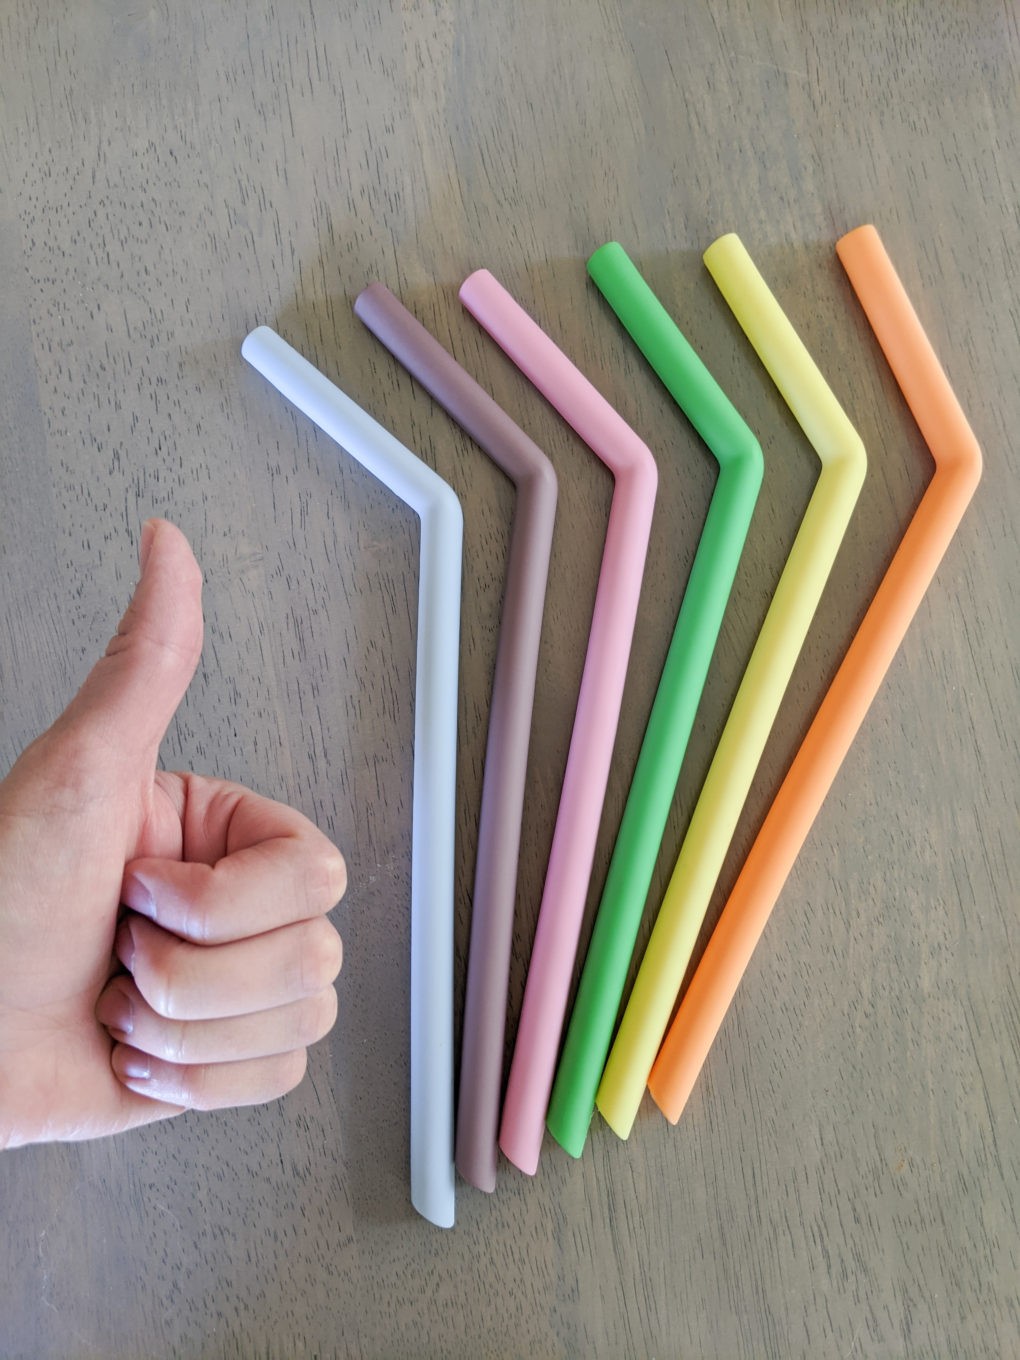 Reusable silicone straws -- Environmentally friendly switches to use less single-use plastic bags, plastic wrap, dryer sheets, etc. Reusable ideas and ways to be eco friendly.